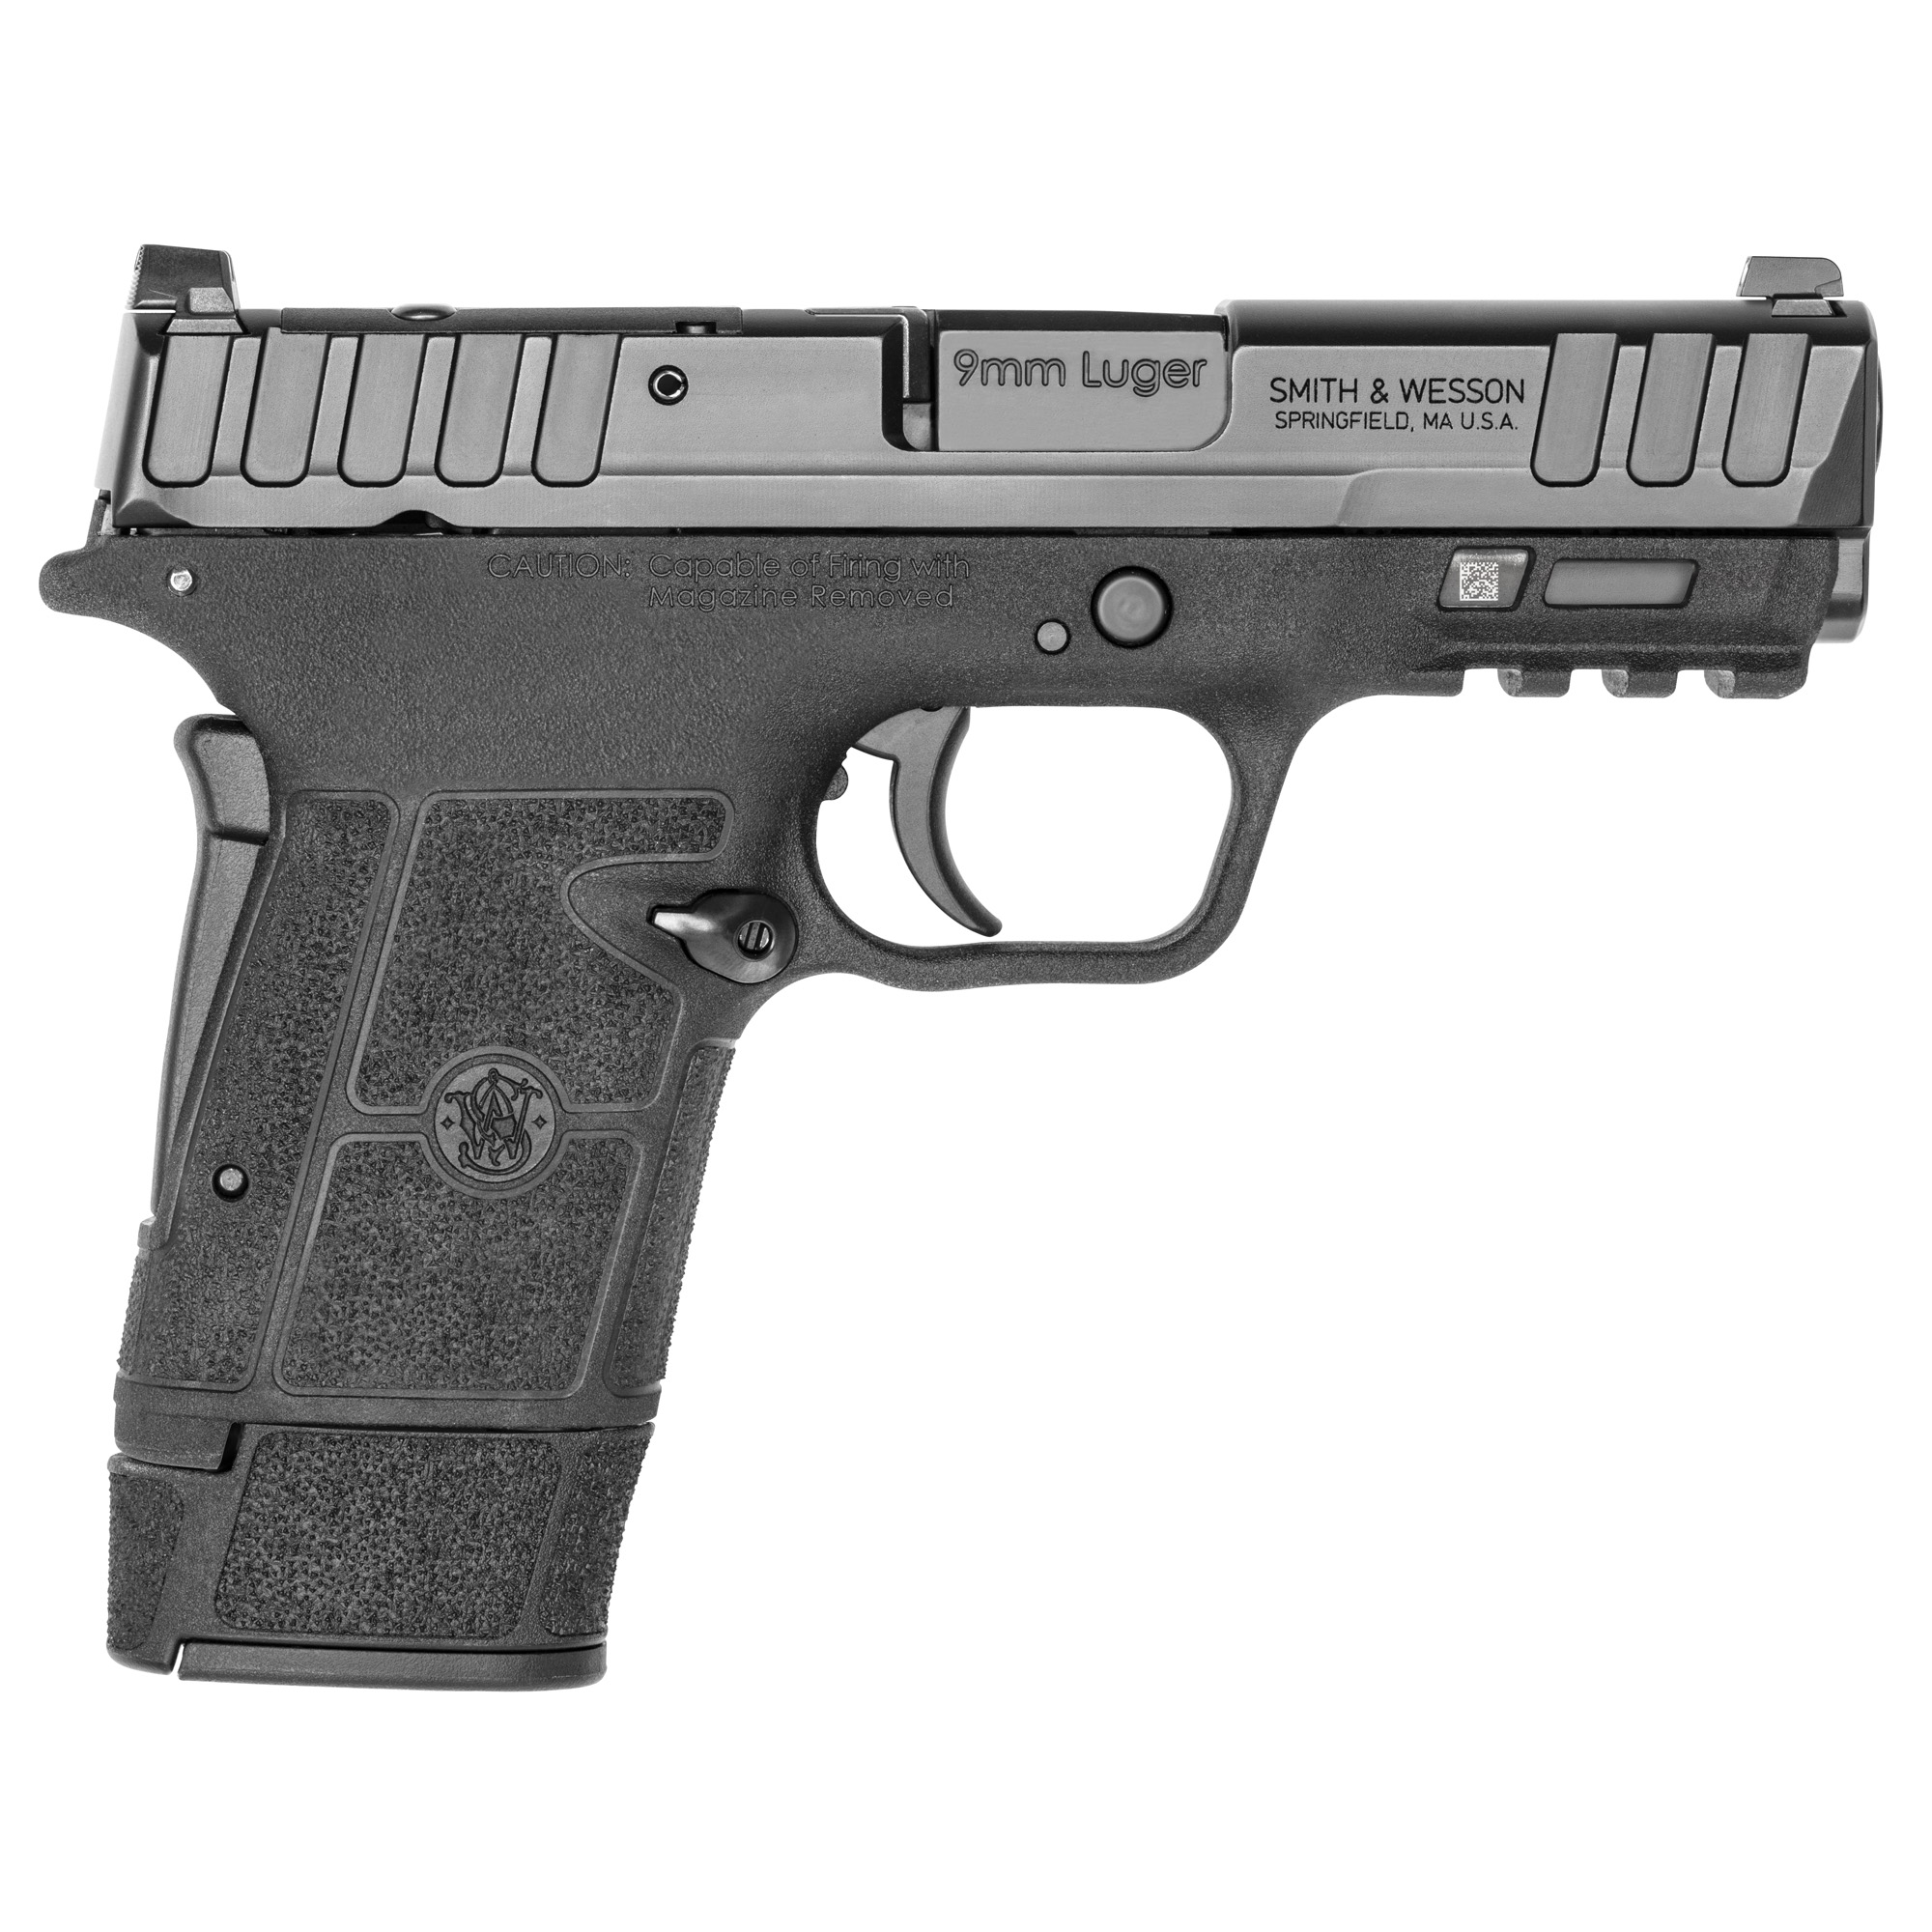 Smith & Wesson, Equalizer, Semi-automatic, Striker Fired, Micro Compact, 9MM, 3.675